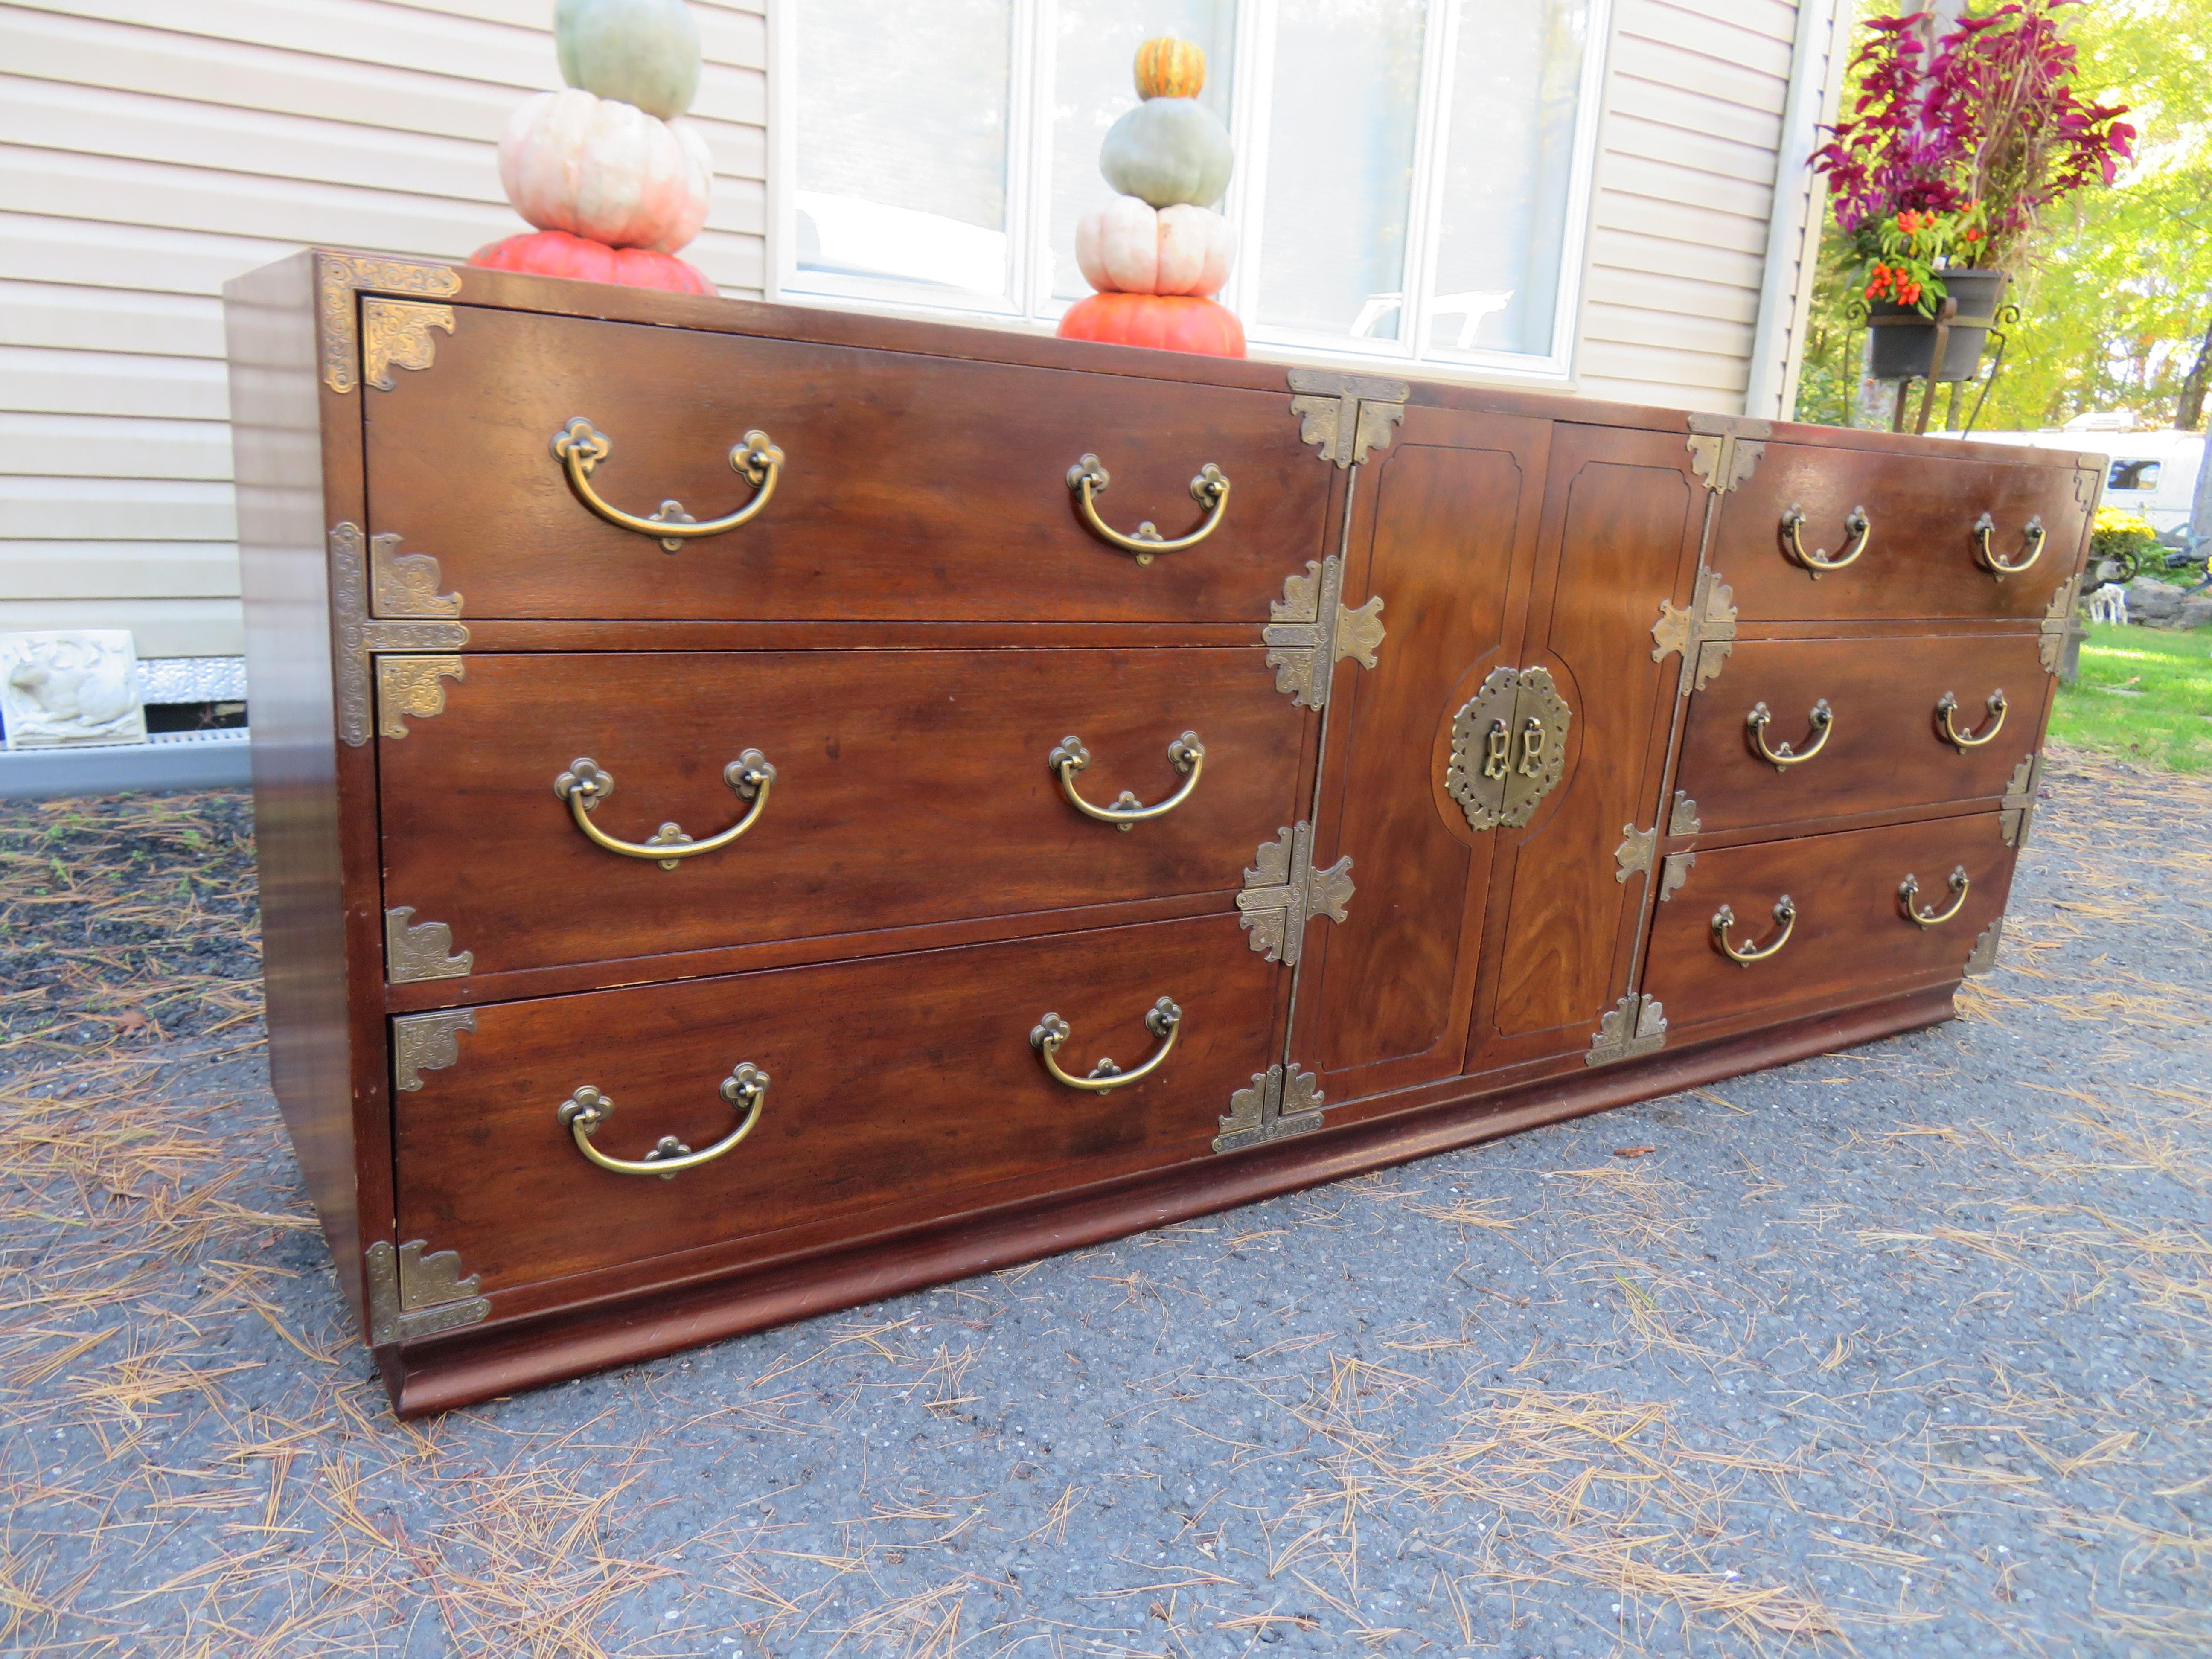 Gorgeous Midcentury campaign Tansu style credenza or long dresser by Henredon Fine Furniture. This credenza features a clean, sleek Midcentury design with an Asian flair. It offers ample room for storage with 9 deep drawers. We love the stylish